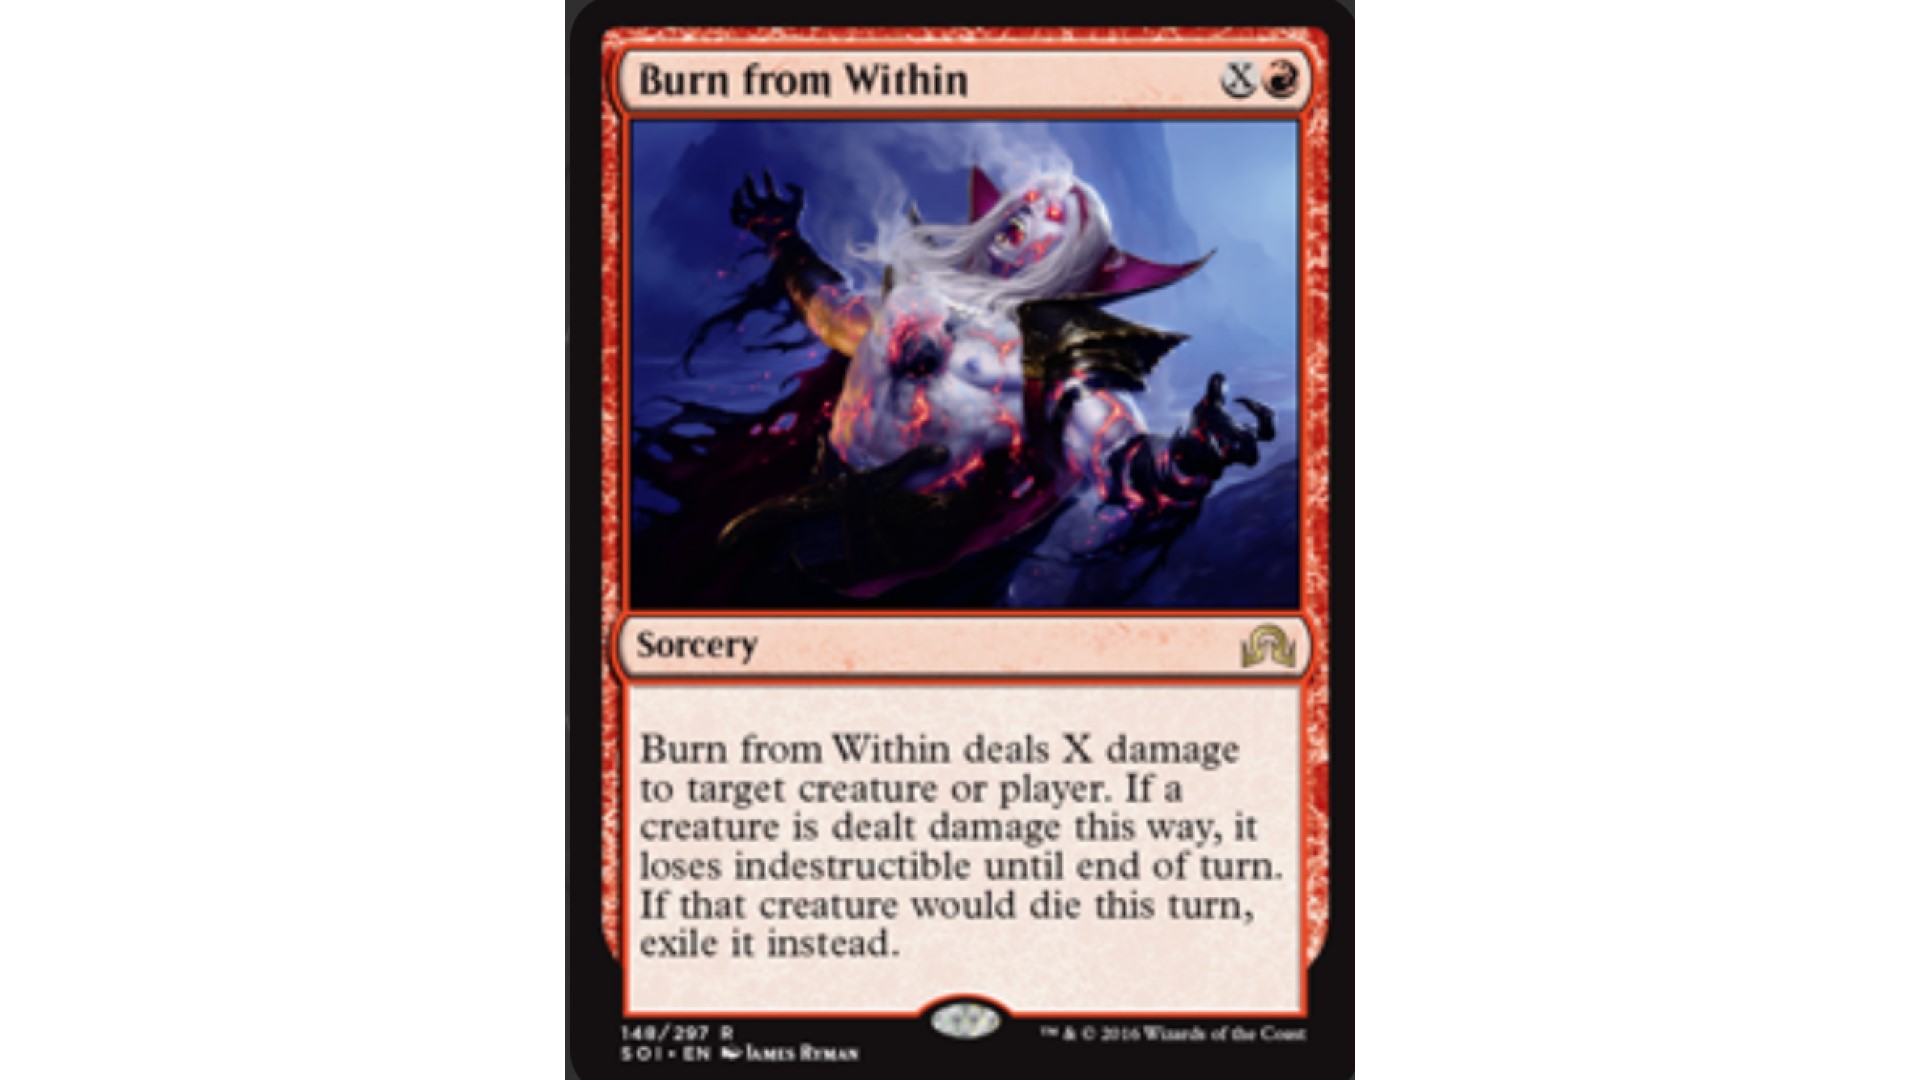 MTG Indestructible - Burn From Within Magic card from Wizards of the Coast